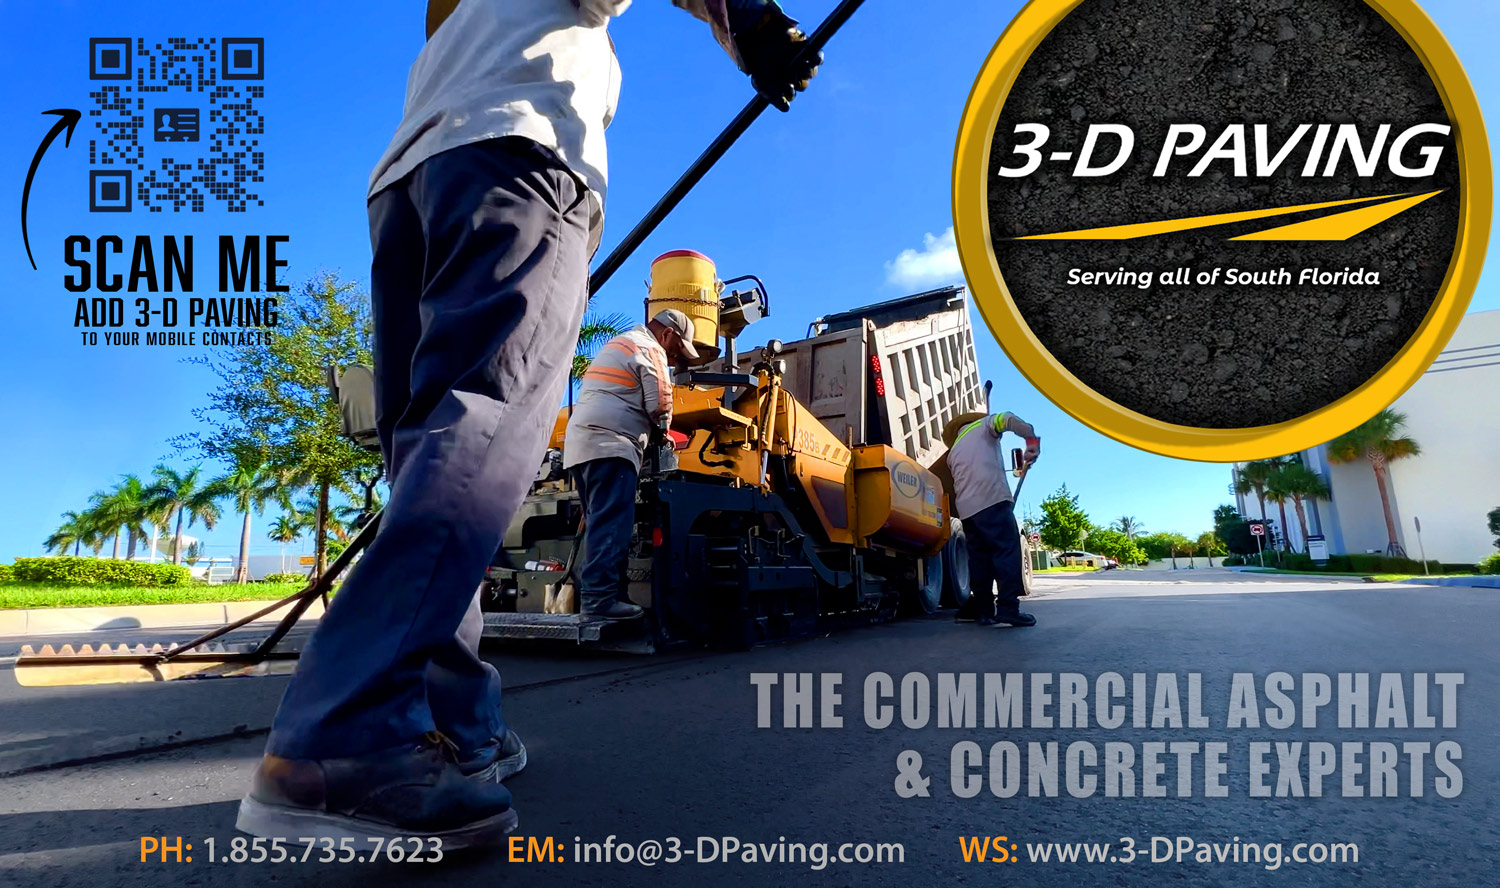 Does your asphalt, roadways or walkways have problems? We have solutions. by 3-D Paving